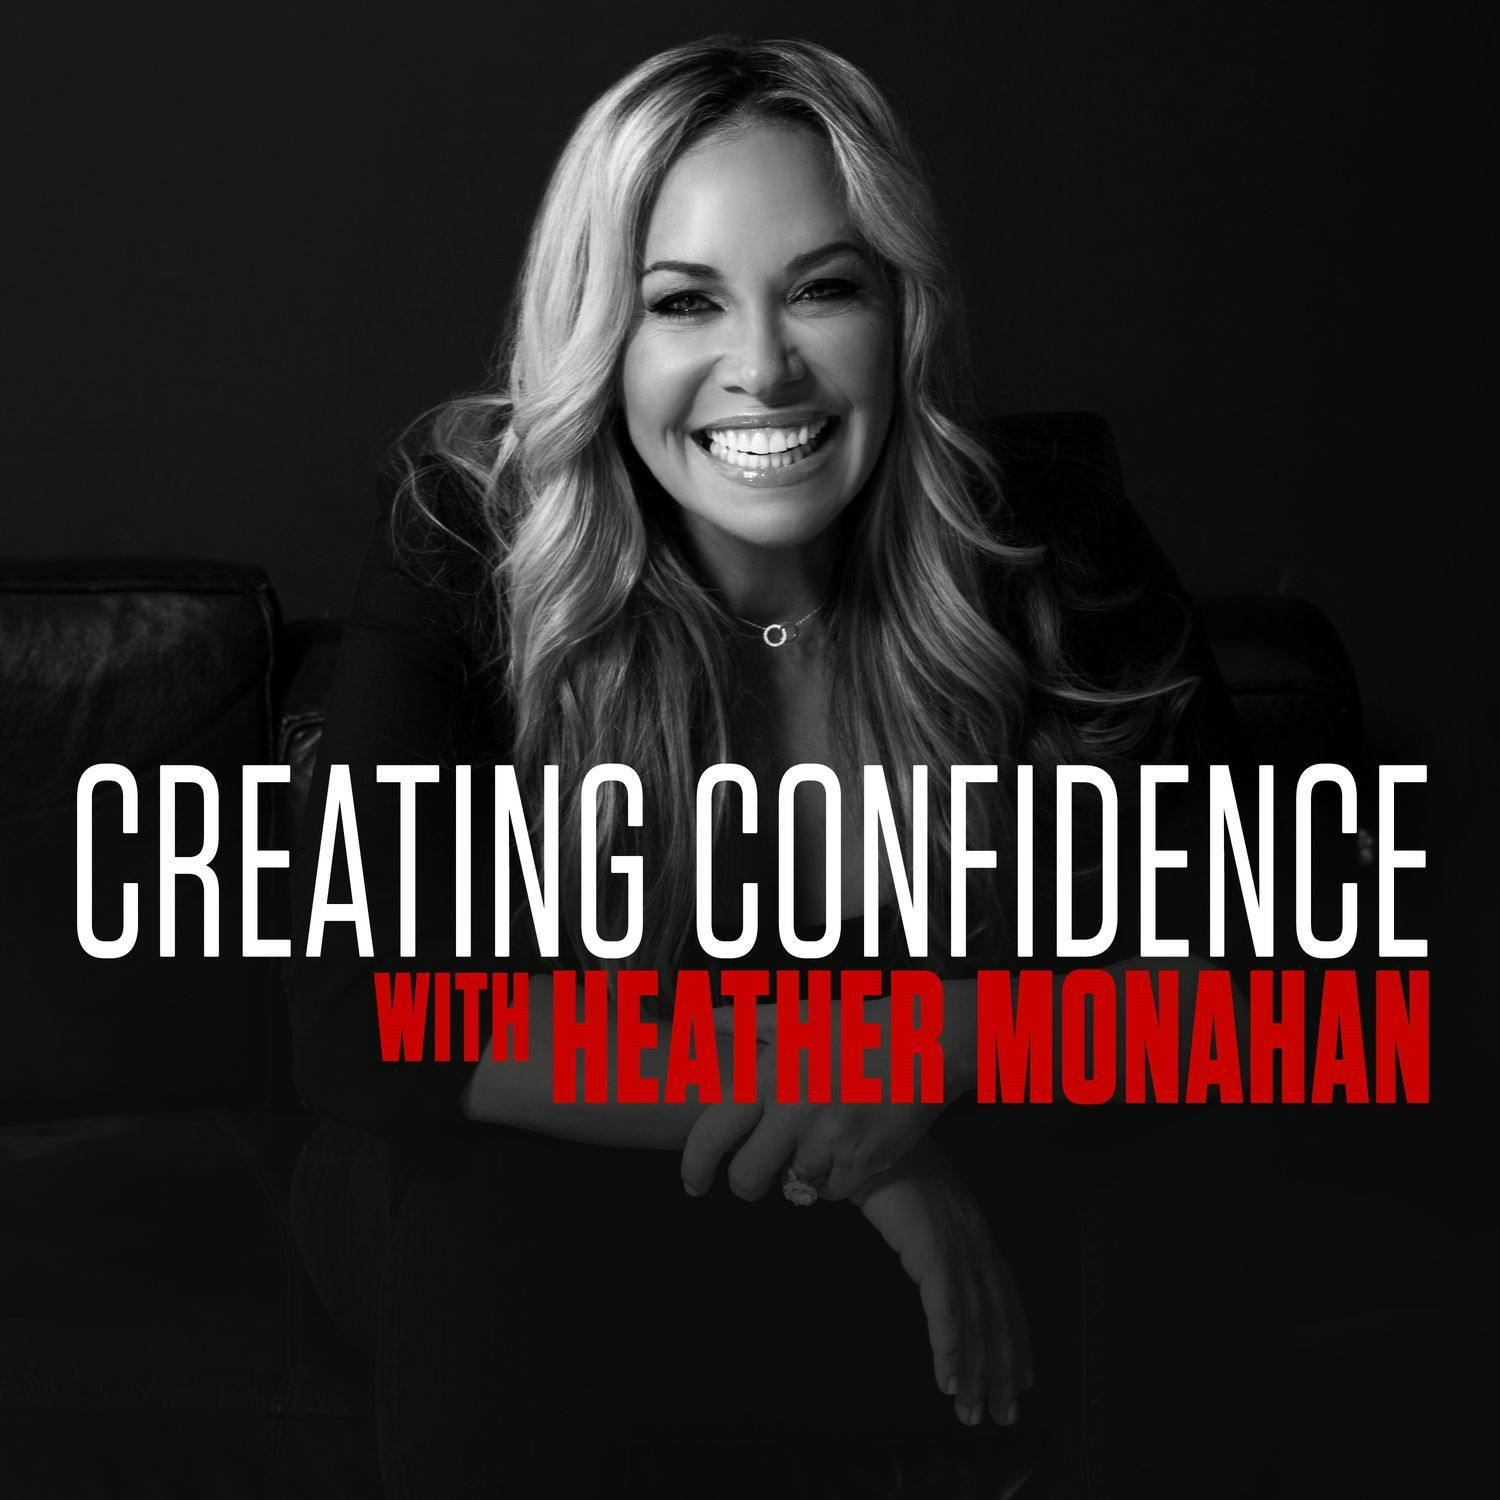 #188: Change Your Habits, Change Your Outcomes With Heather! by Heather Monahan | YAP Media Network